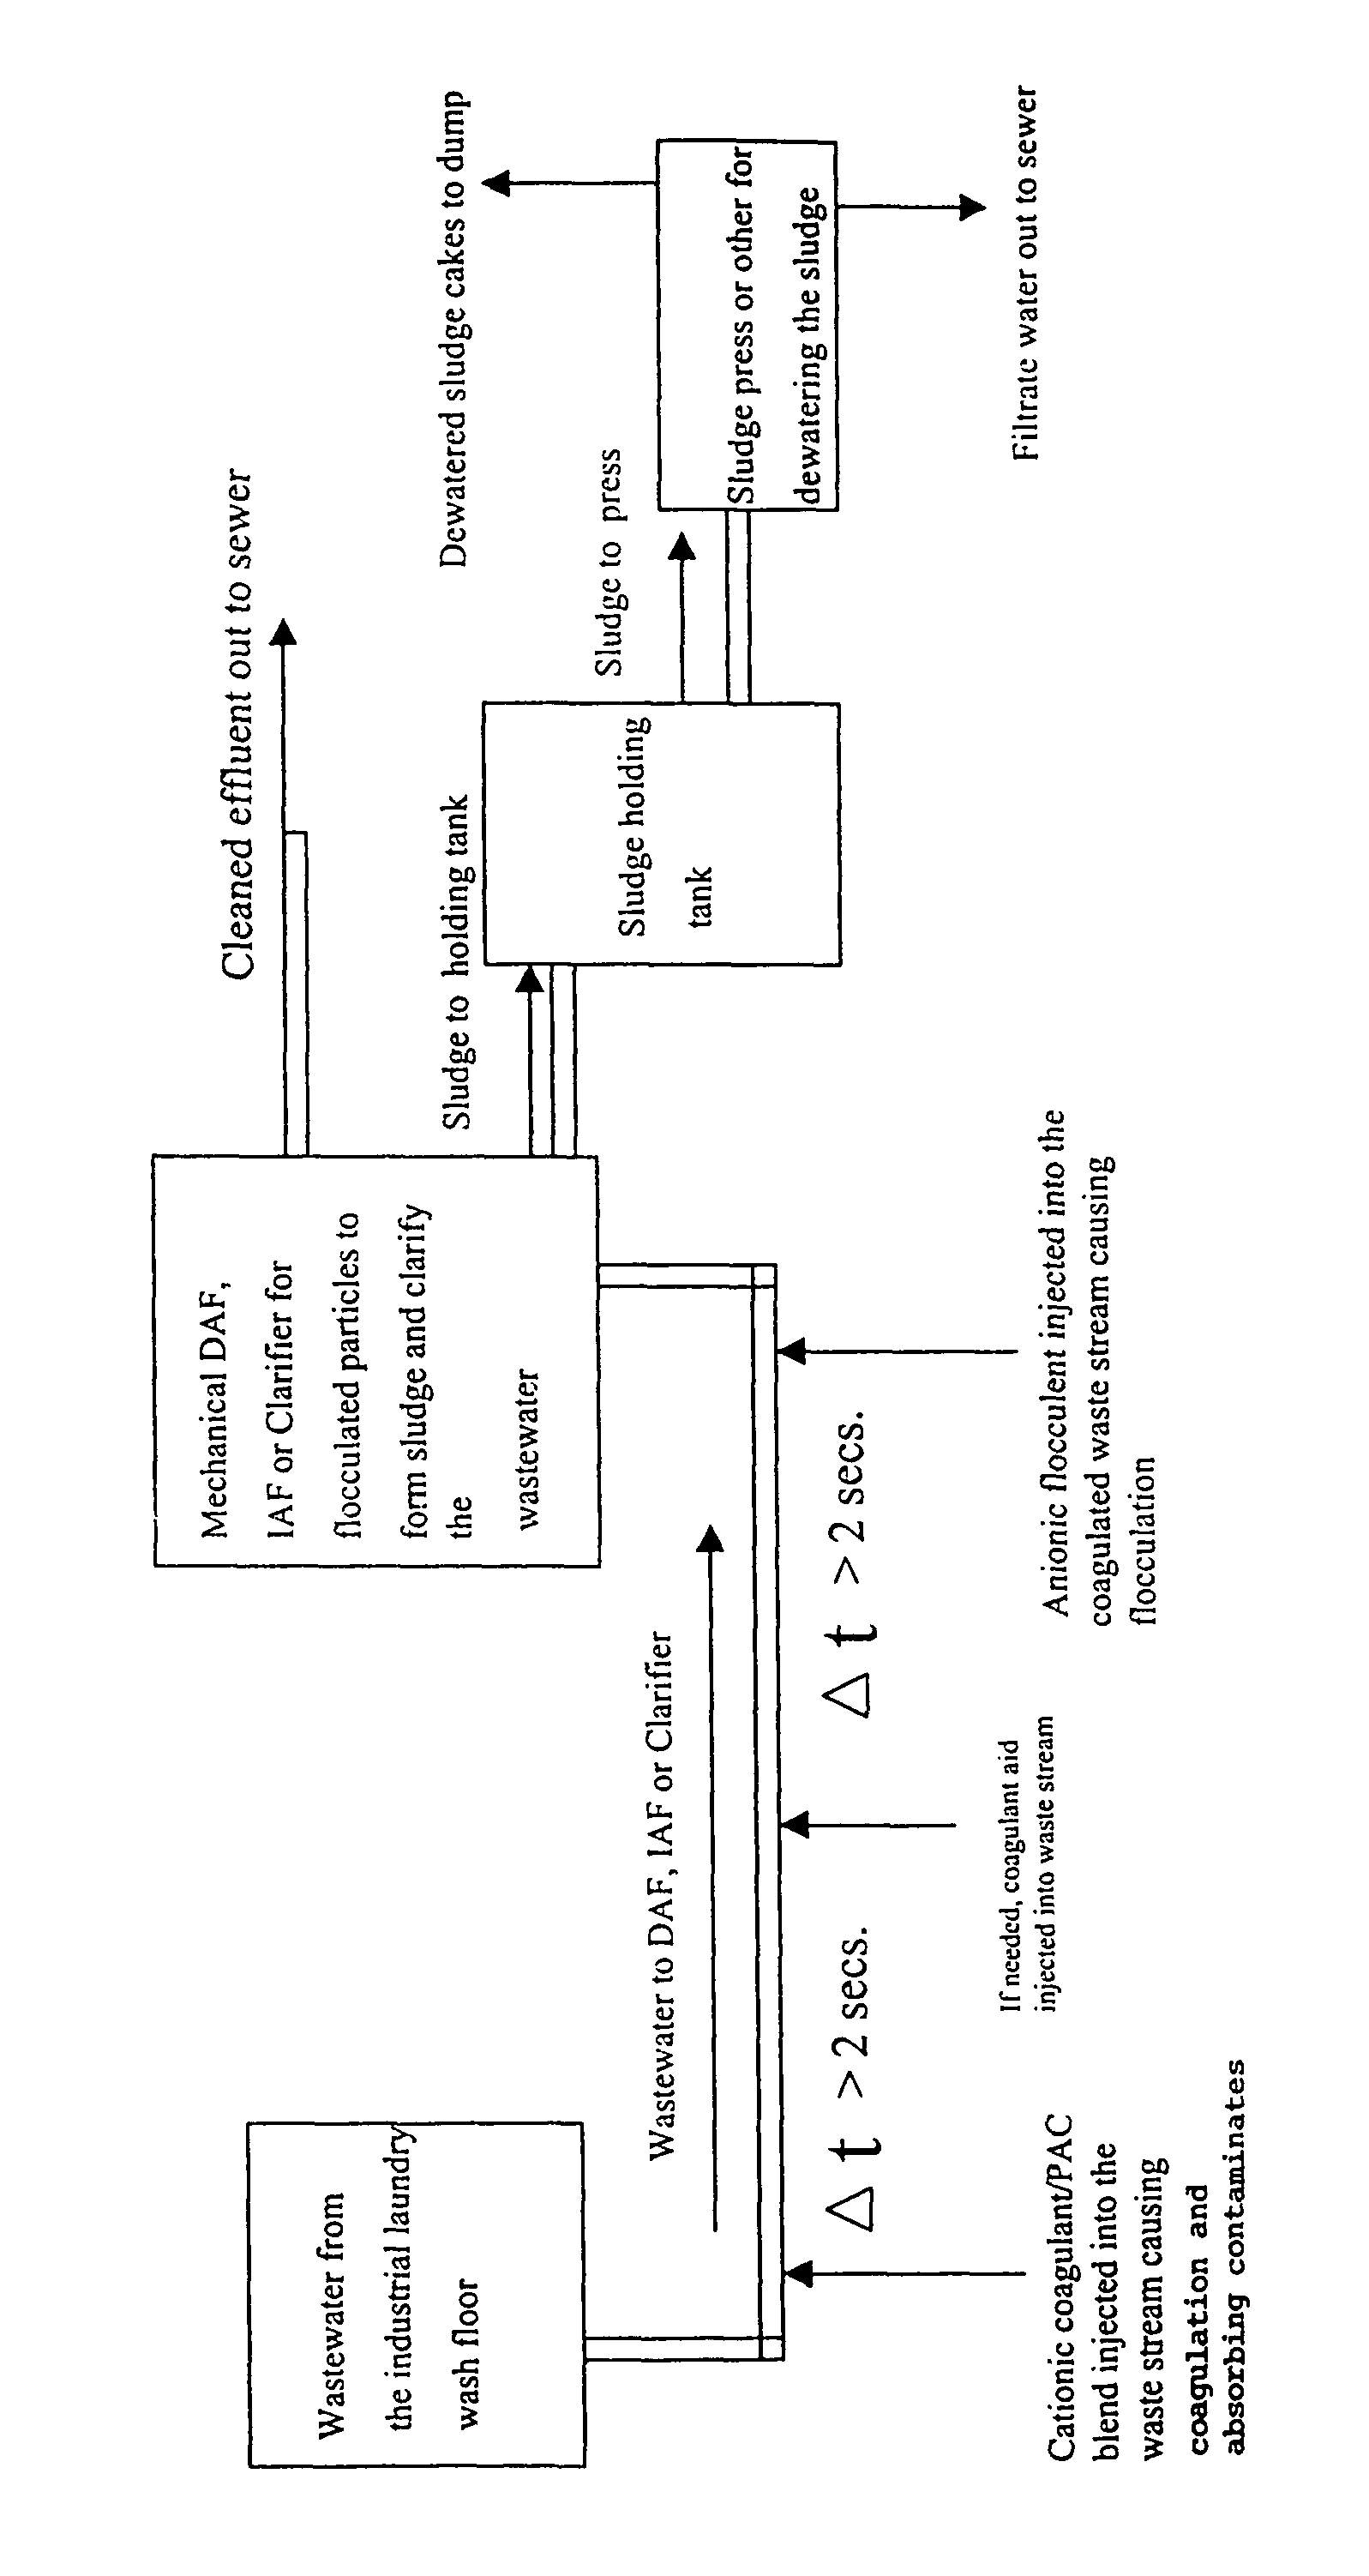 Method of clarifying industrial wastewater for the reduction of organic waste content using cationic dispersion polymers combined with powdered activated carbon and anionic flocculent polymers